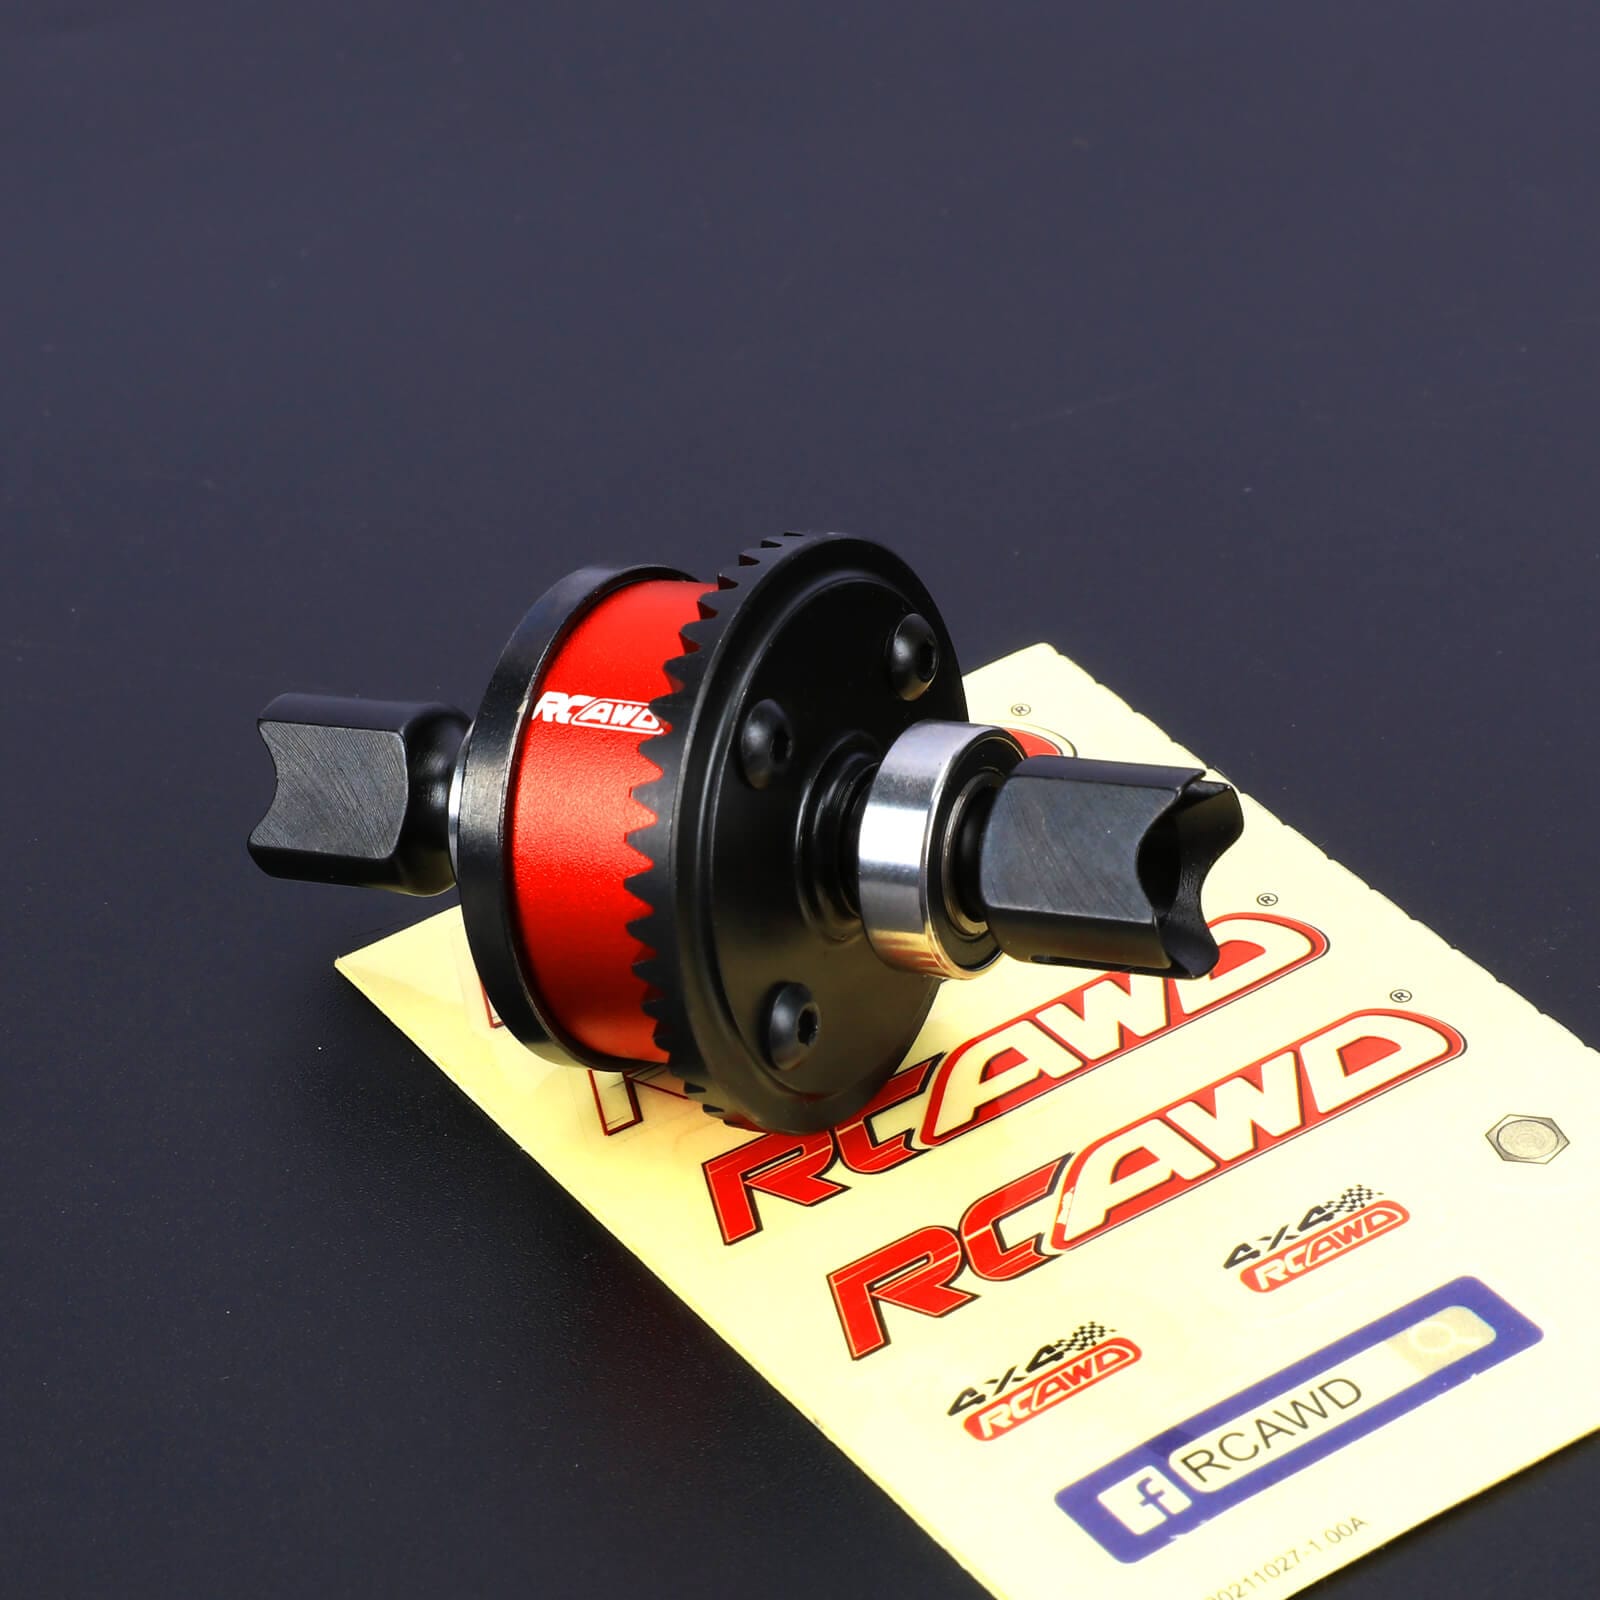 RCAWD ARRMA 6S Only Differential Set RCAWD Arrma 6S Upgrades RTR 43T 10T Differential Set with Input gear SD2-ARA310957 S-ARA310957